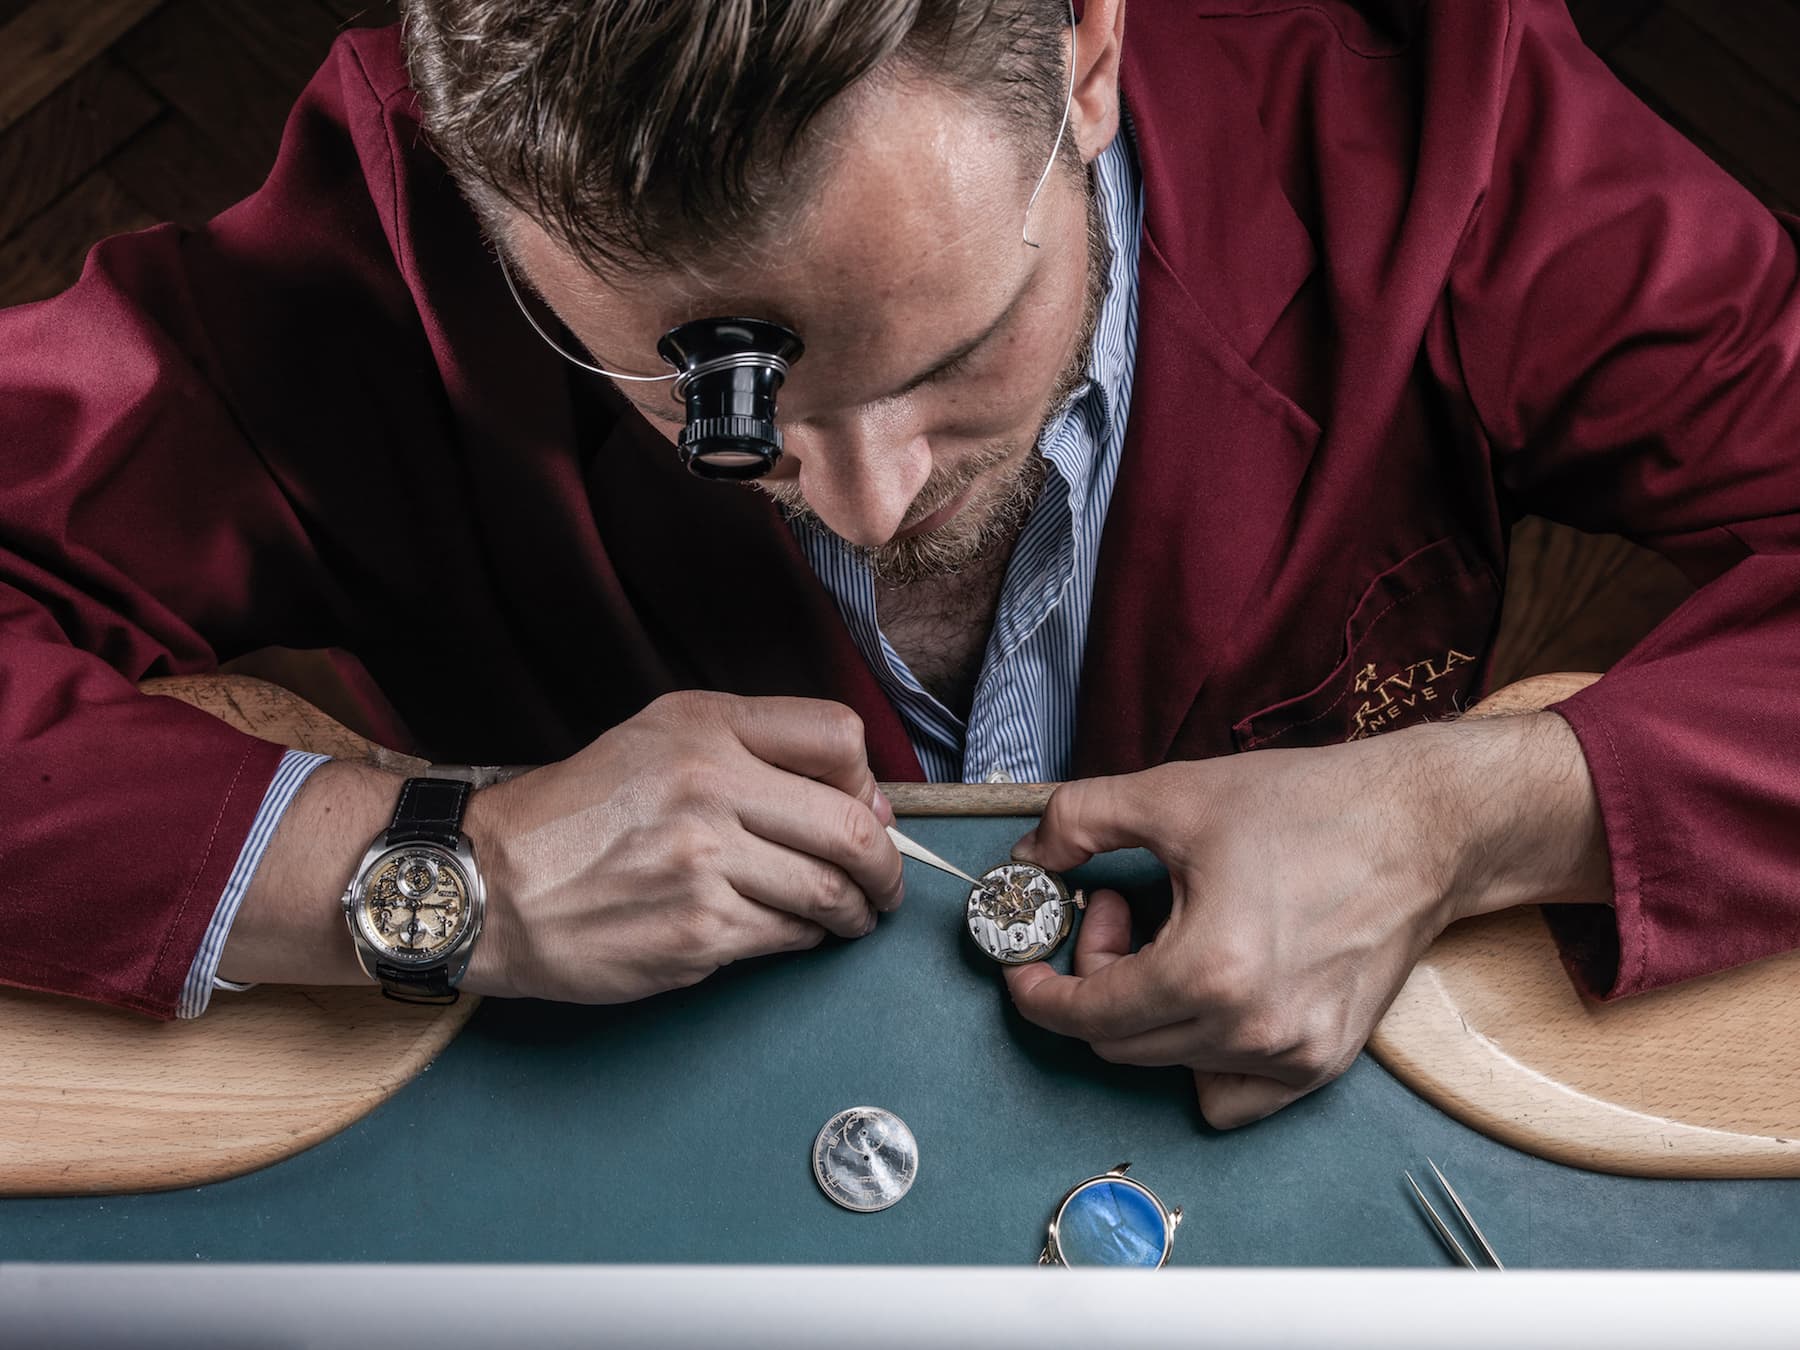 Rexhep Rexhepi, the young independent watchmaker who insists on traditional techniques